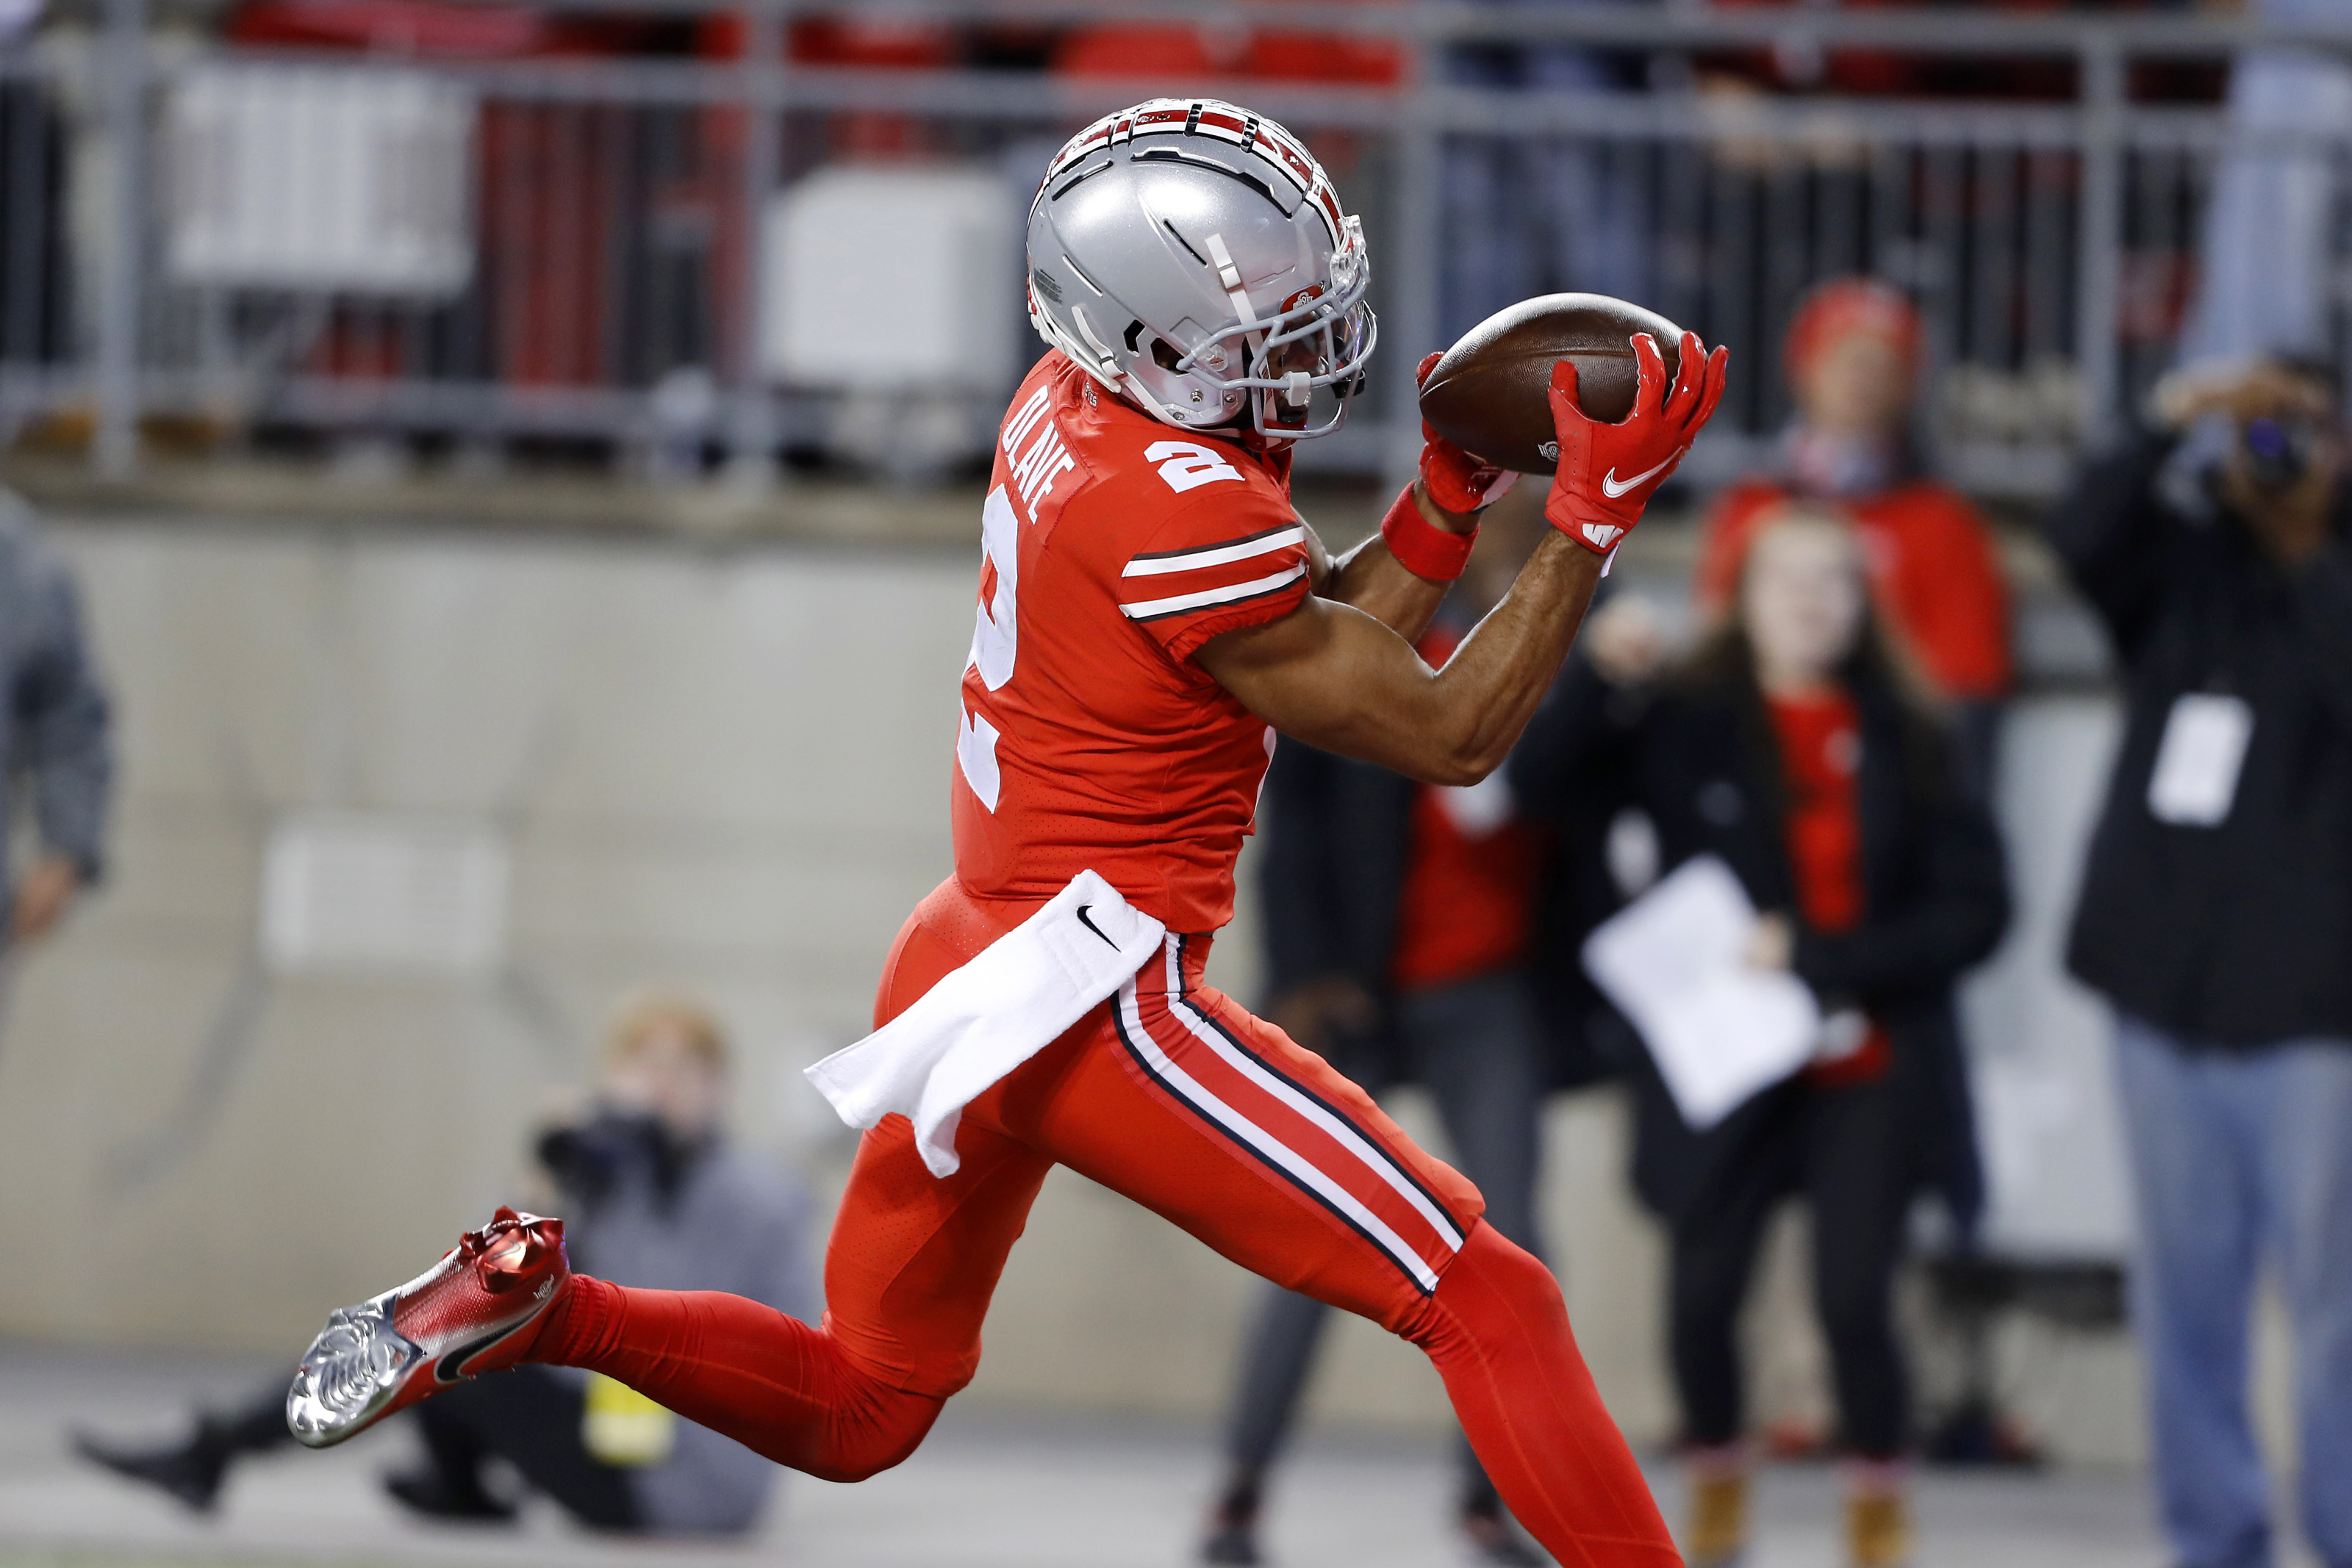 2022 NFL Draft: Tiered Wide Receiver Rankings 1.0